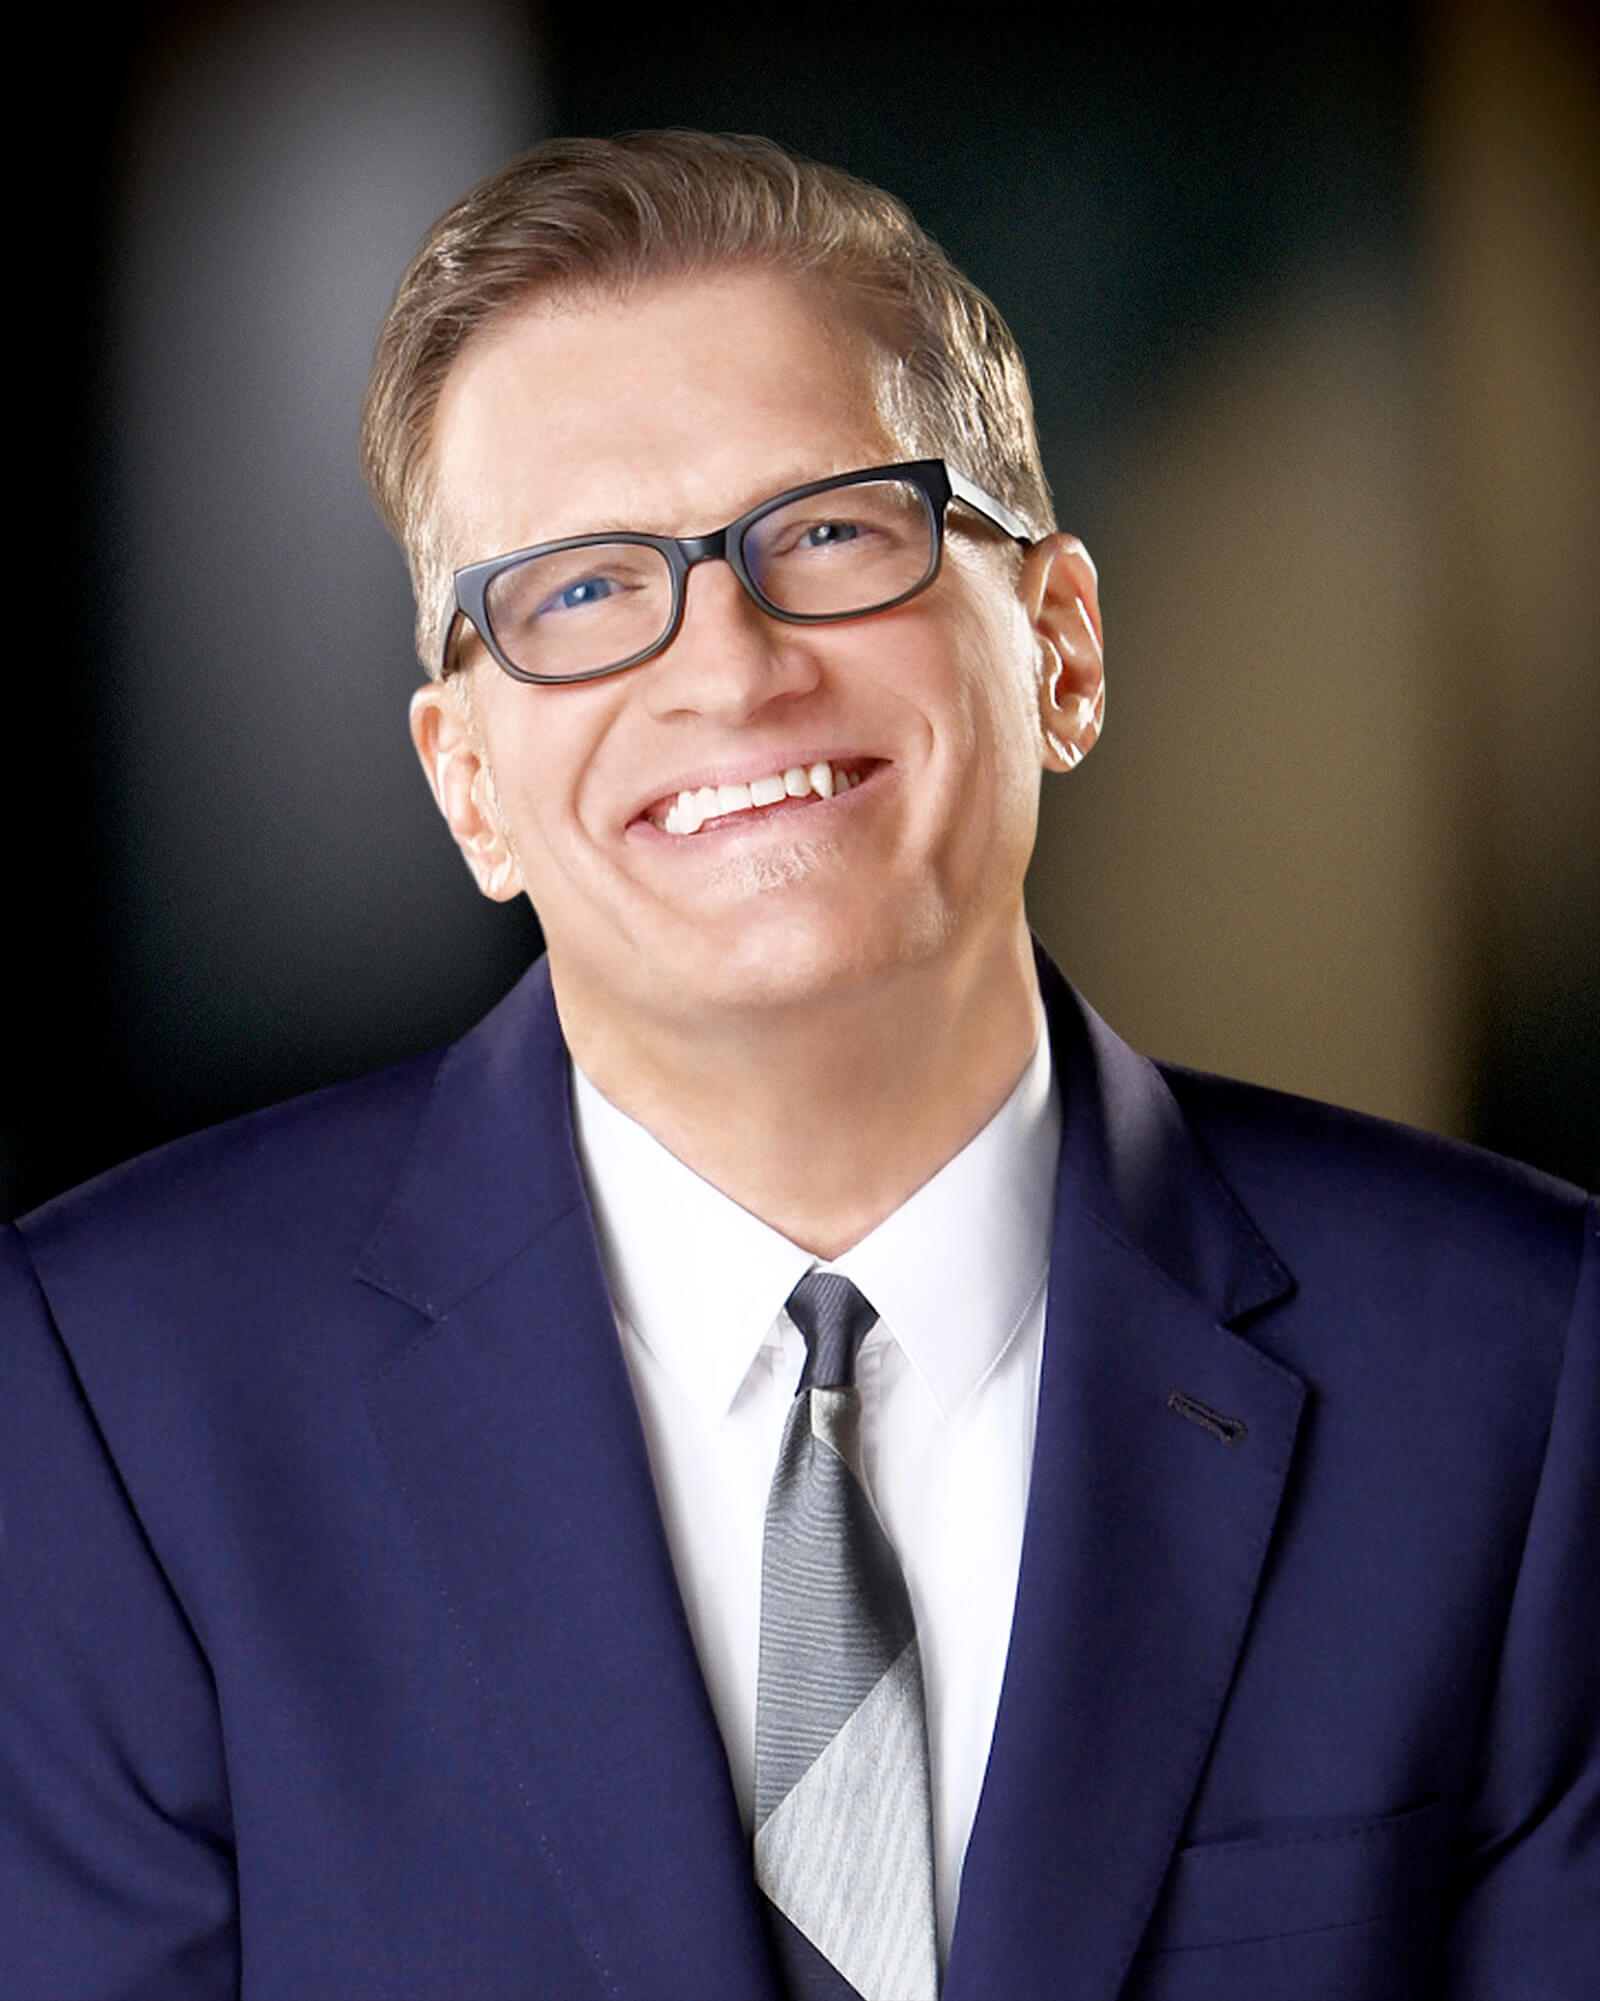 Hire Comedian, Actor and Host The Price is Right Drew Carey PDA